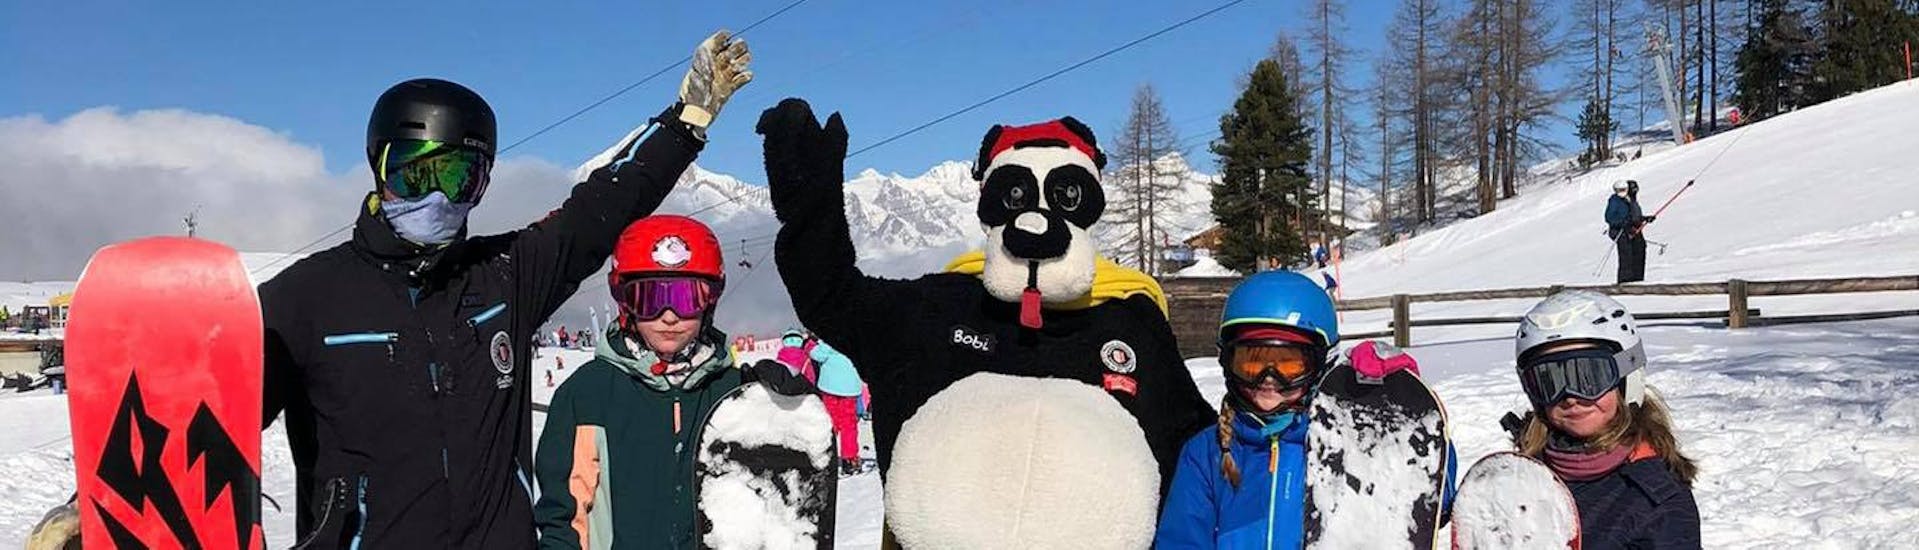 A group of snowboarders is visited by the mascot Bobi at the Kids & Adult Snowboarding Lessons (from 4 y.) for First Timers with Skischule Grächen - Zenklusen Sport.